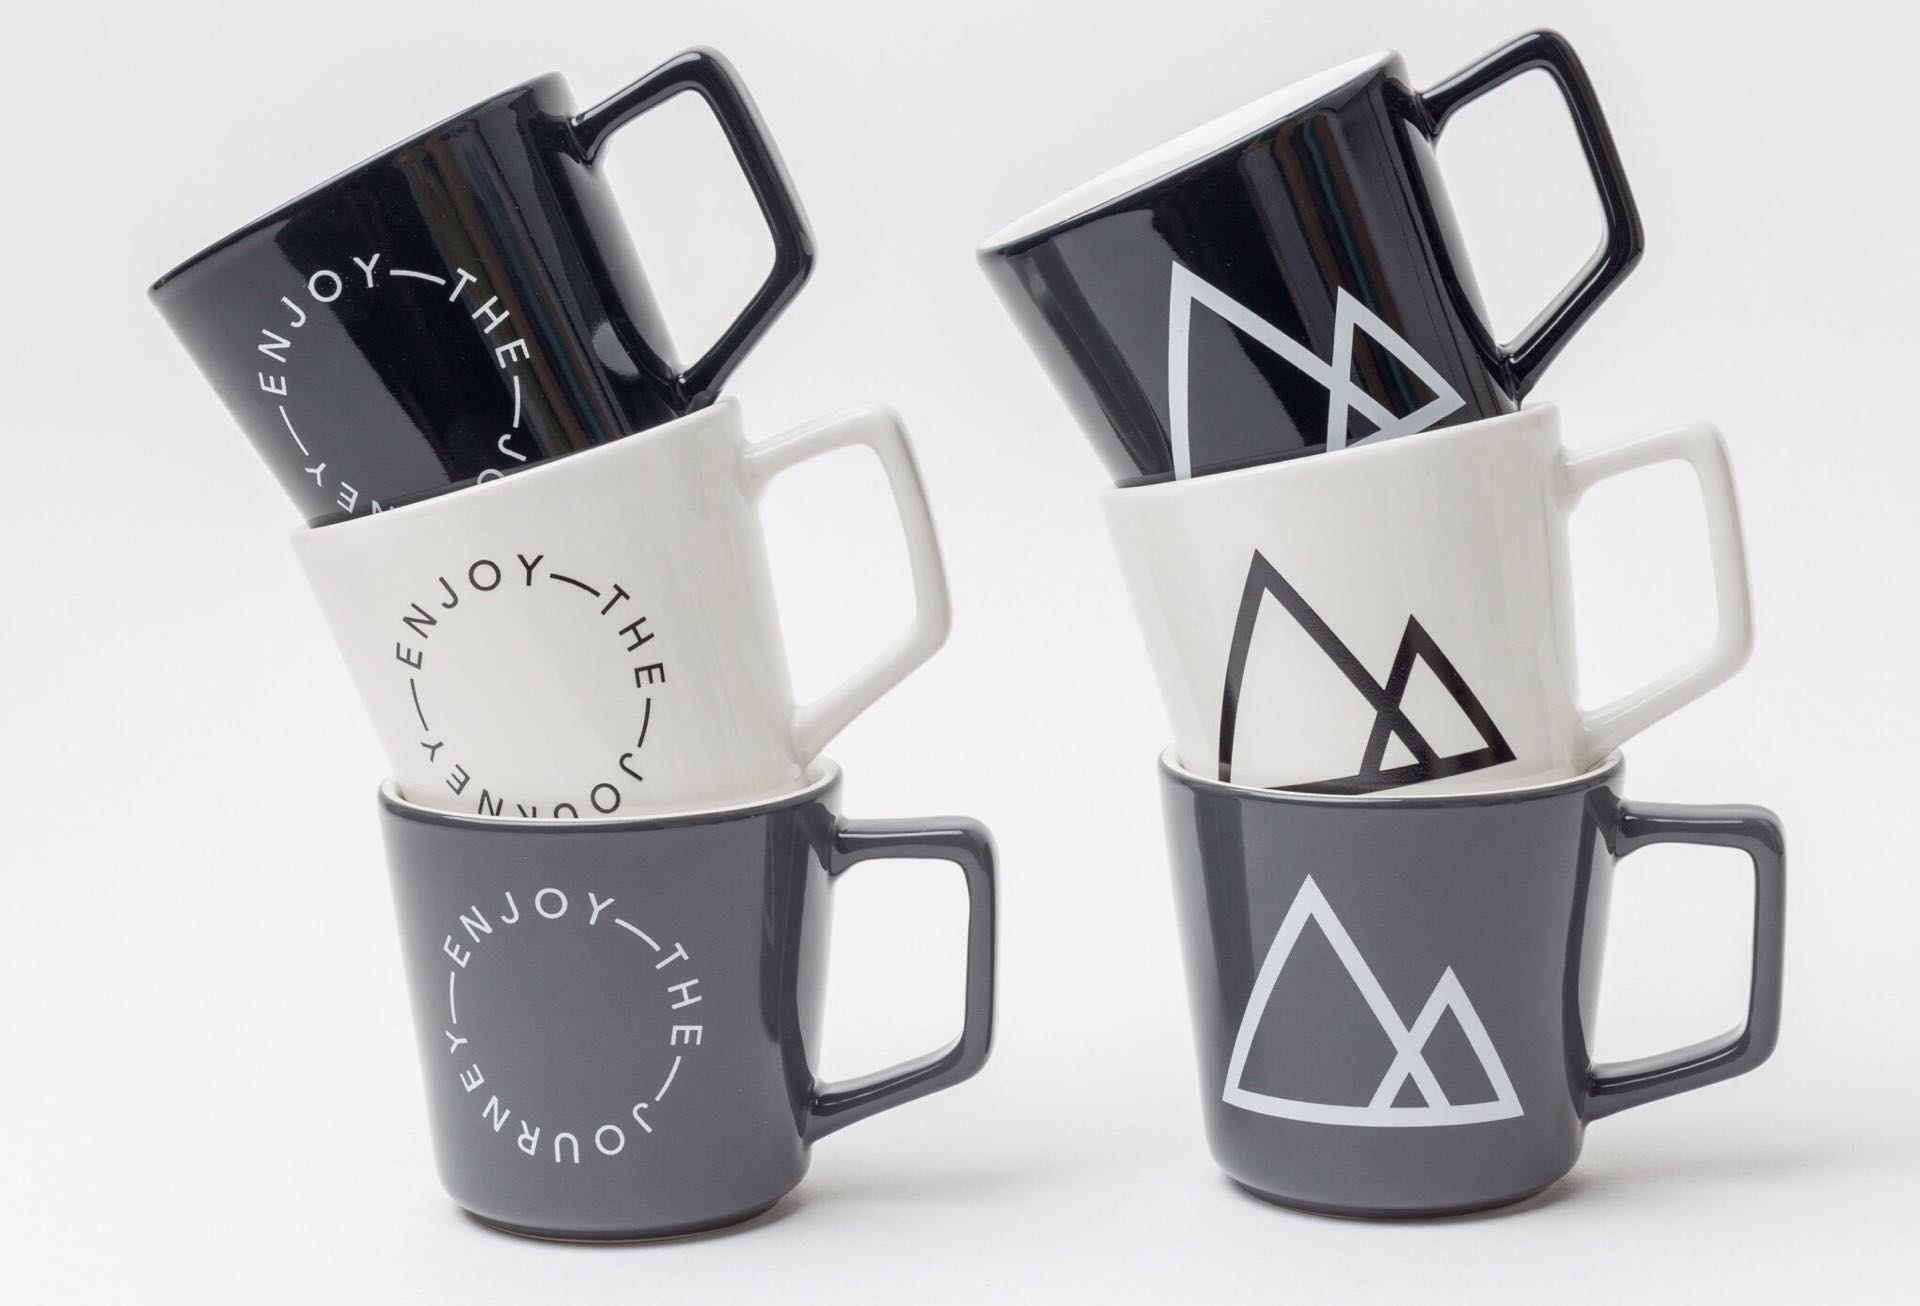 Ugmonk's latest set of coffee mugs. ($119 for the full set; other prices listed below)